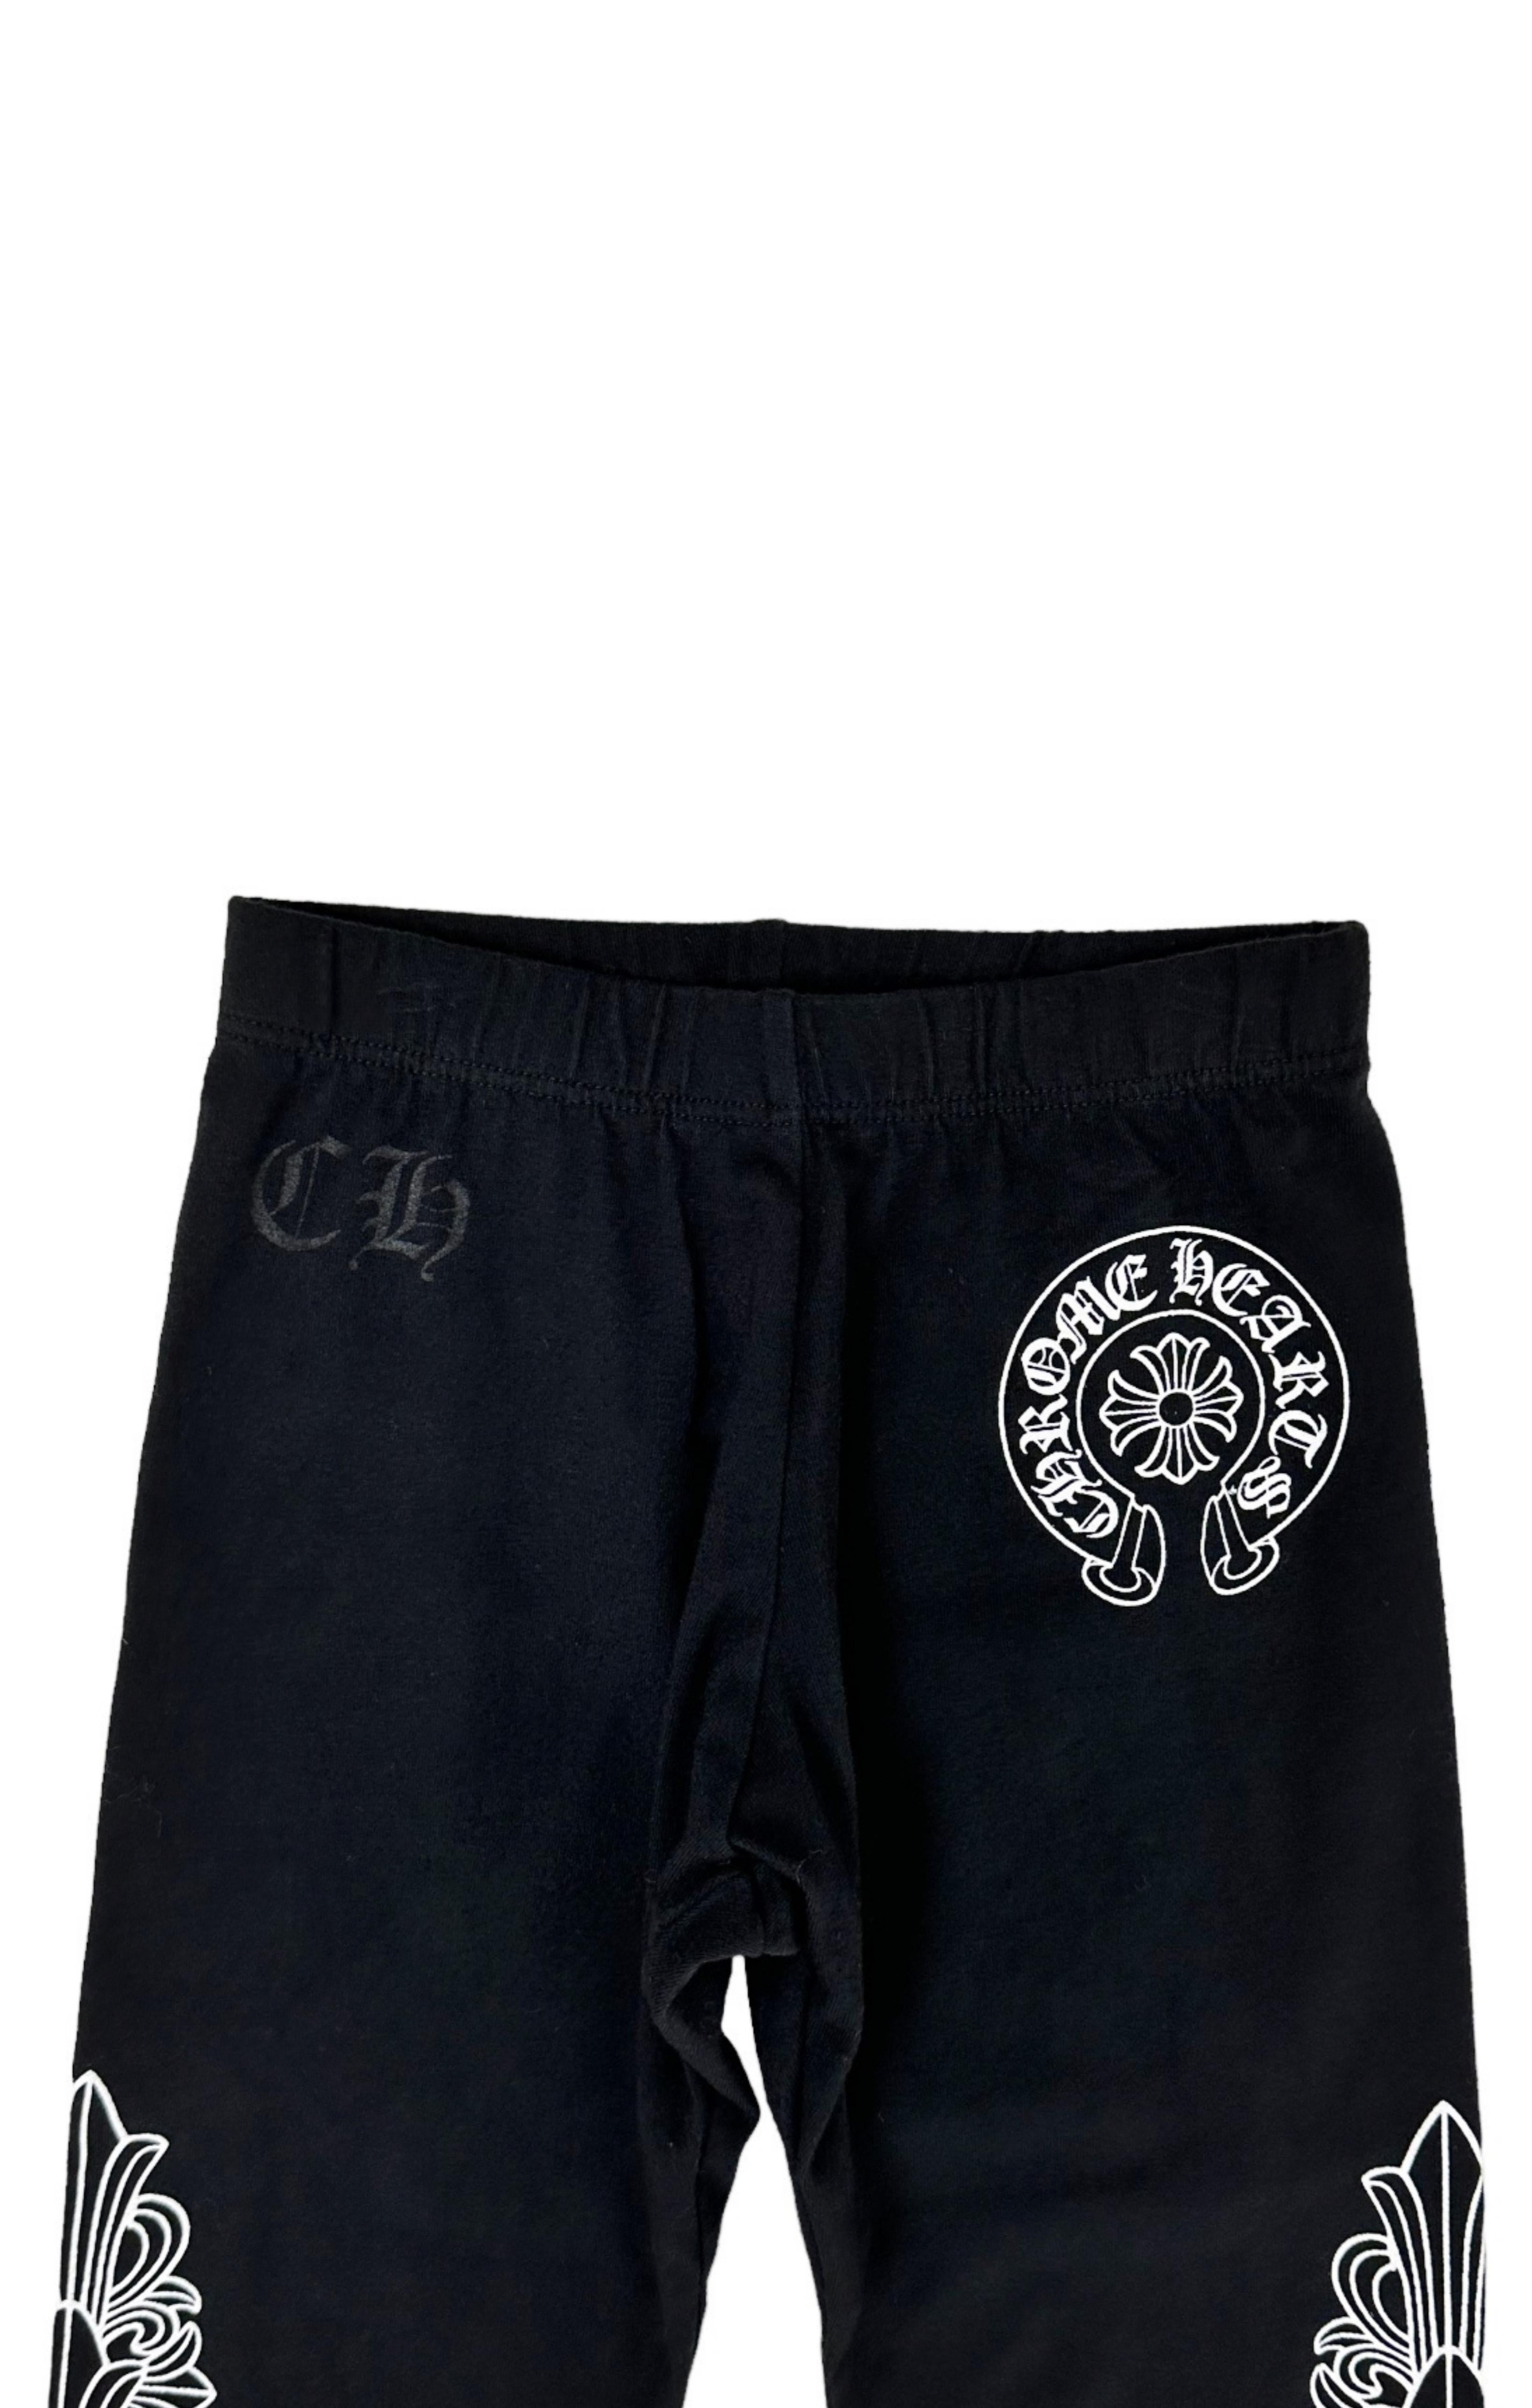 CHROME HEARTS (RARE) Leggings Size: No size tags, fit like 5 Years